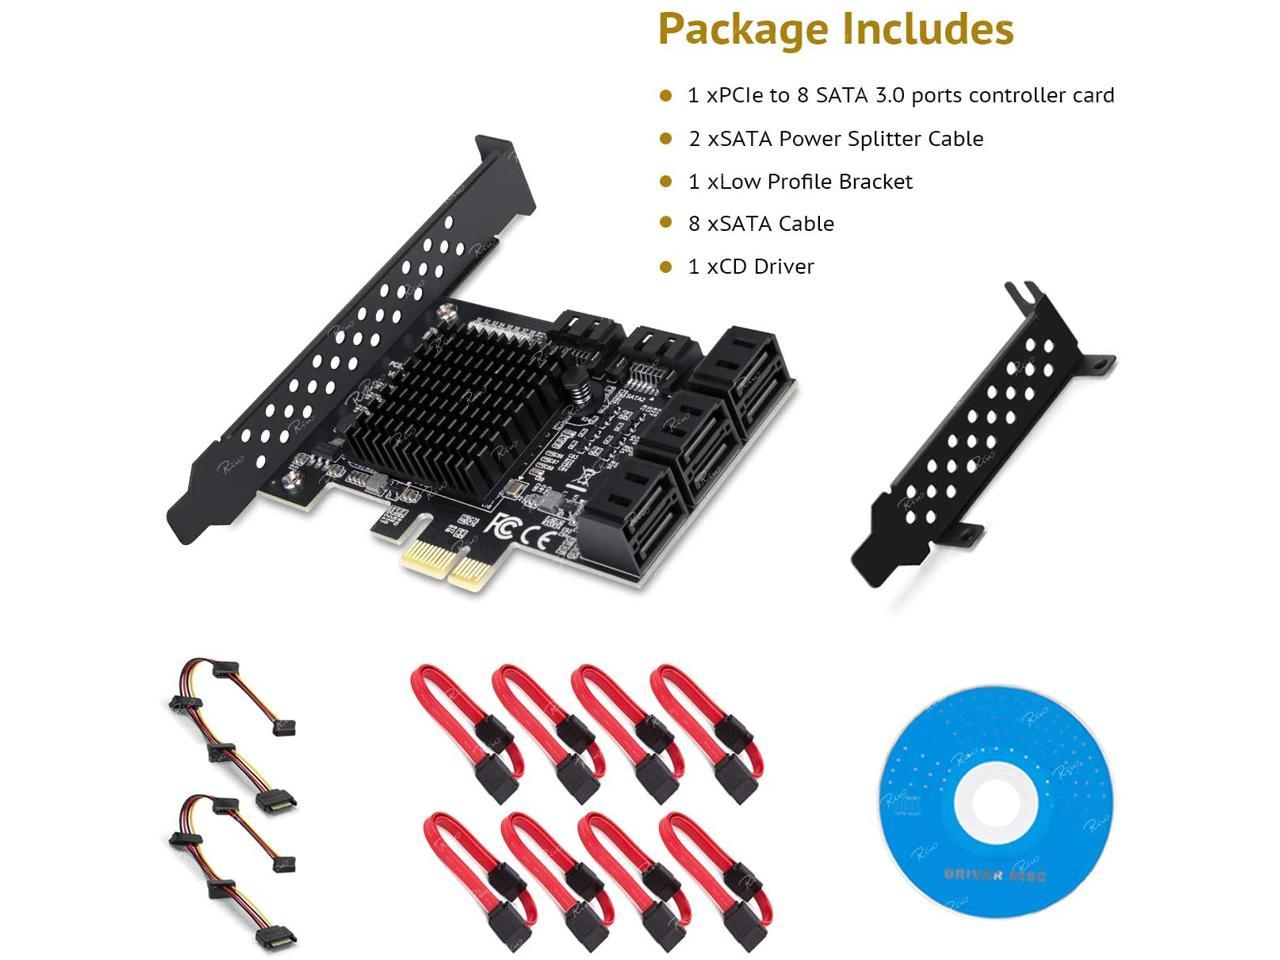 Tamppkon PCIe SATA Card, 8 Port SATA Controller Expansion Card with Low  Profile Bracket, Marvell 9215 Non-Raid, Boot as System Disk, Support 8 SATA  